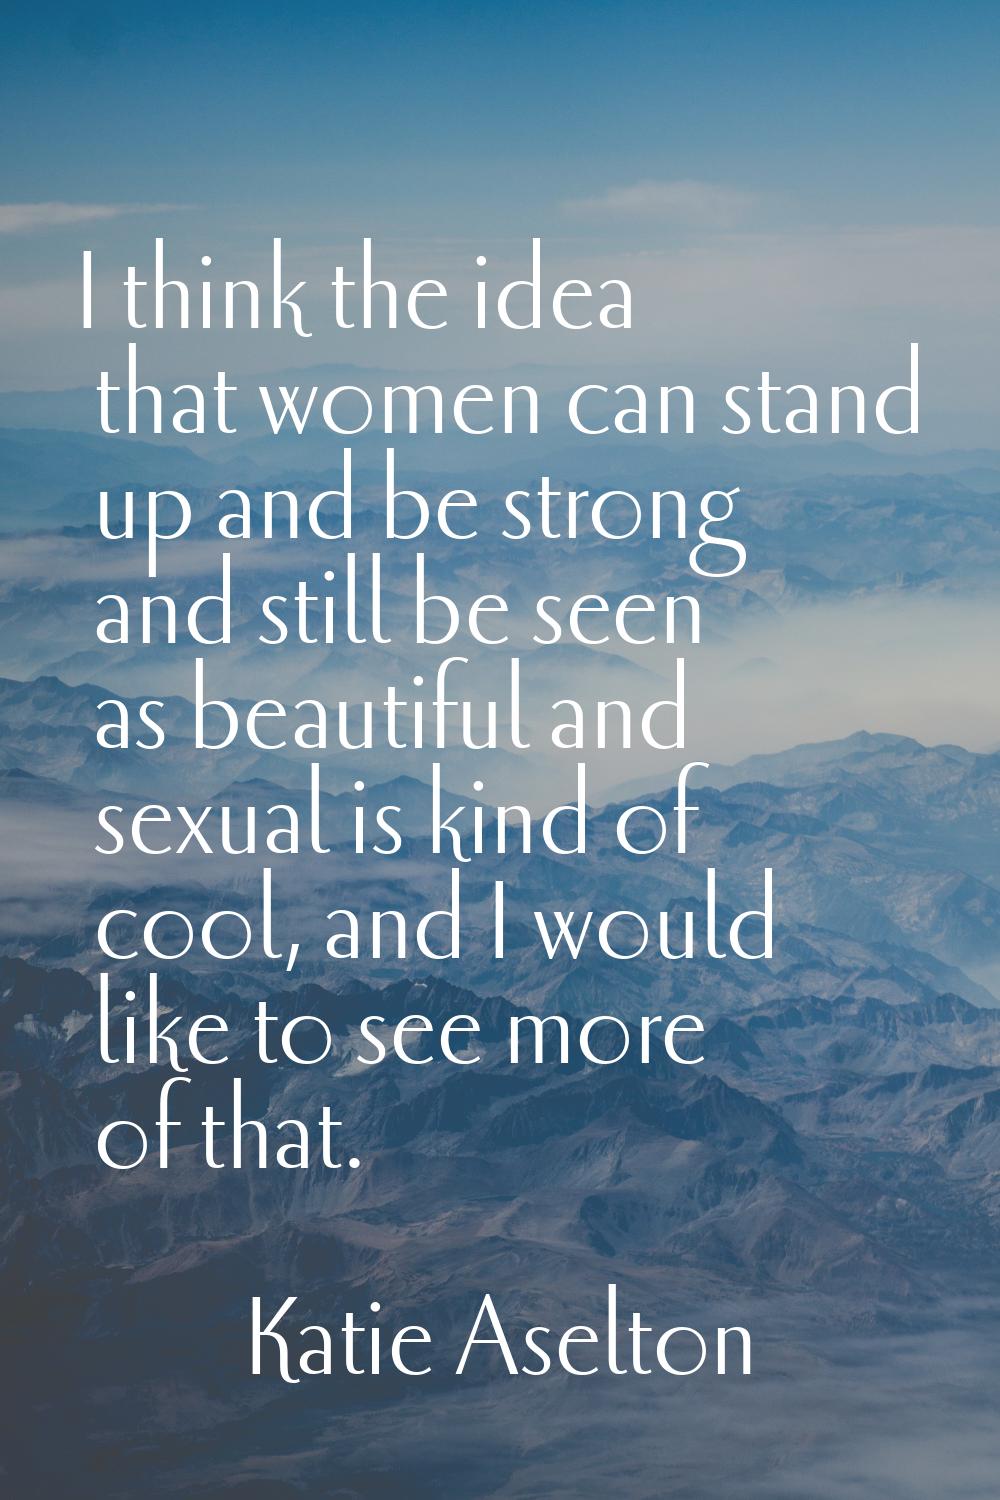 I think the idea that women can stand up and be strong and still be seen as beautiful and sexual is